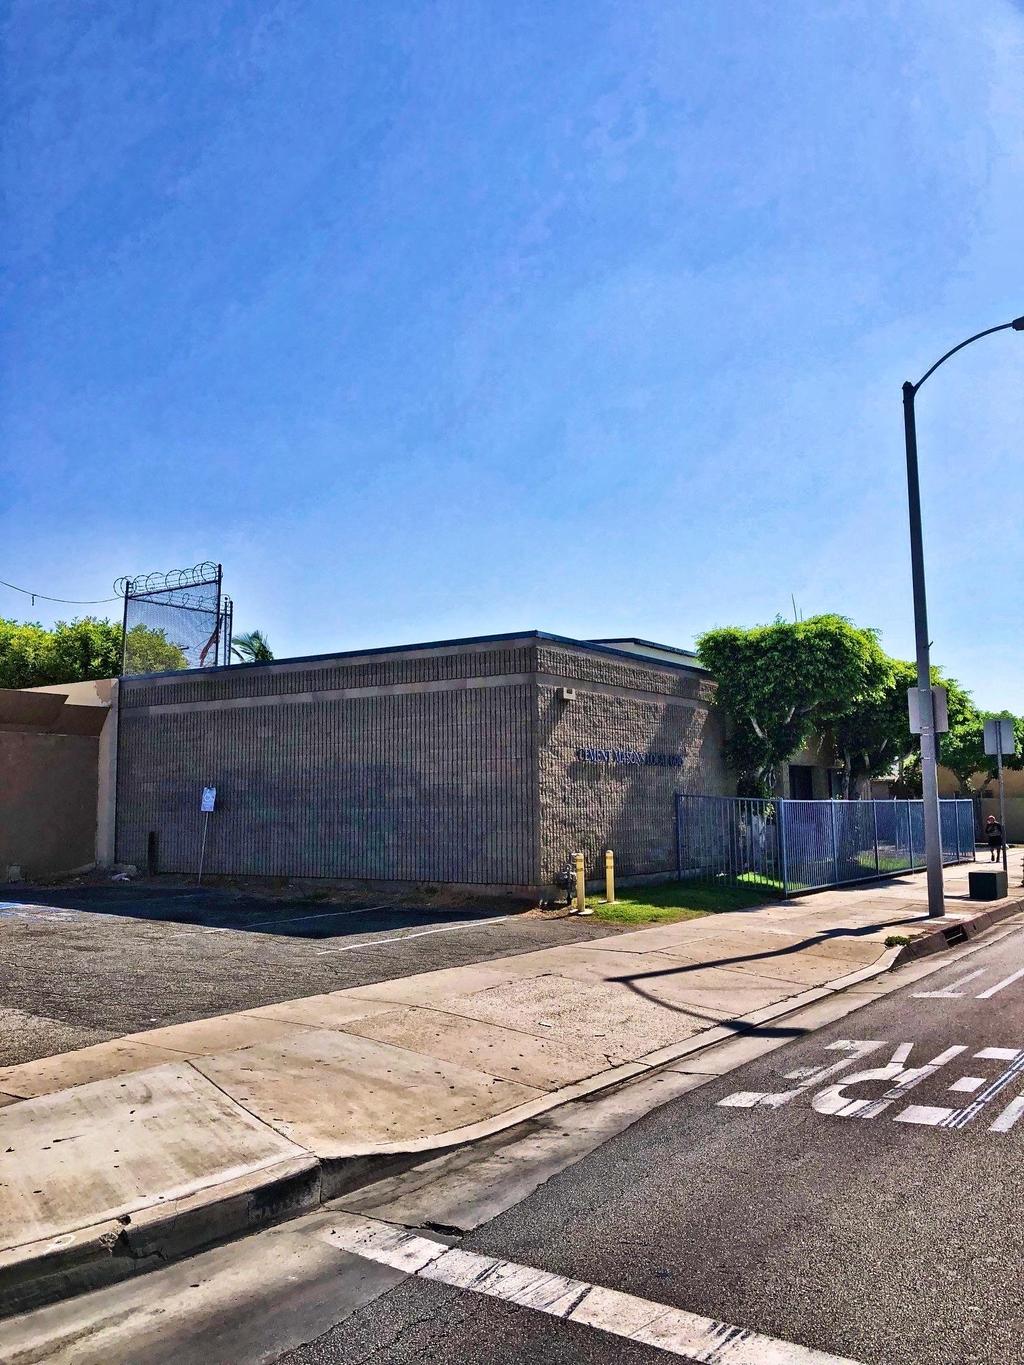 ASSET DESCRIPTION PARCEL 1: 5805 Florence Avenue Features a small vacant free standing building constructed in 1961.